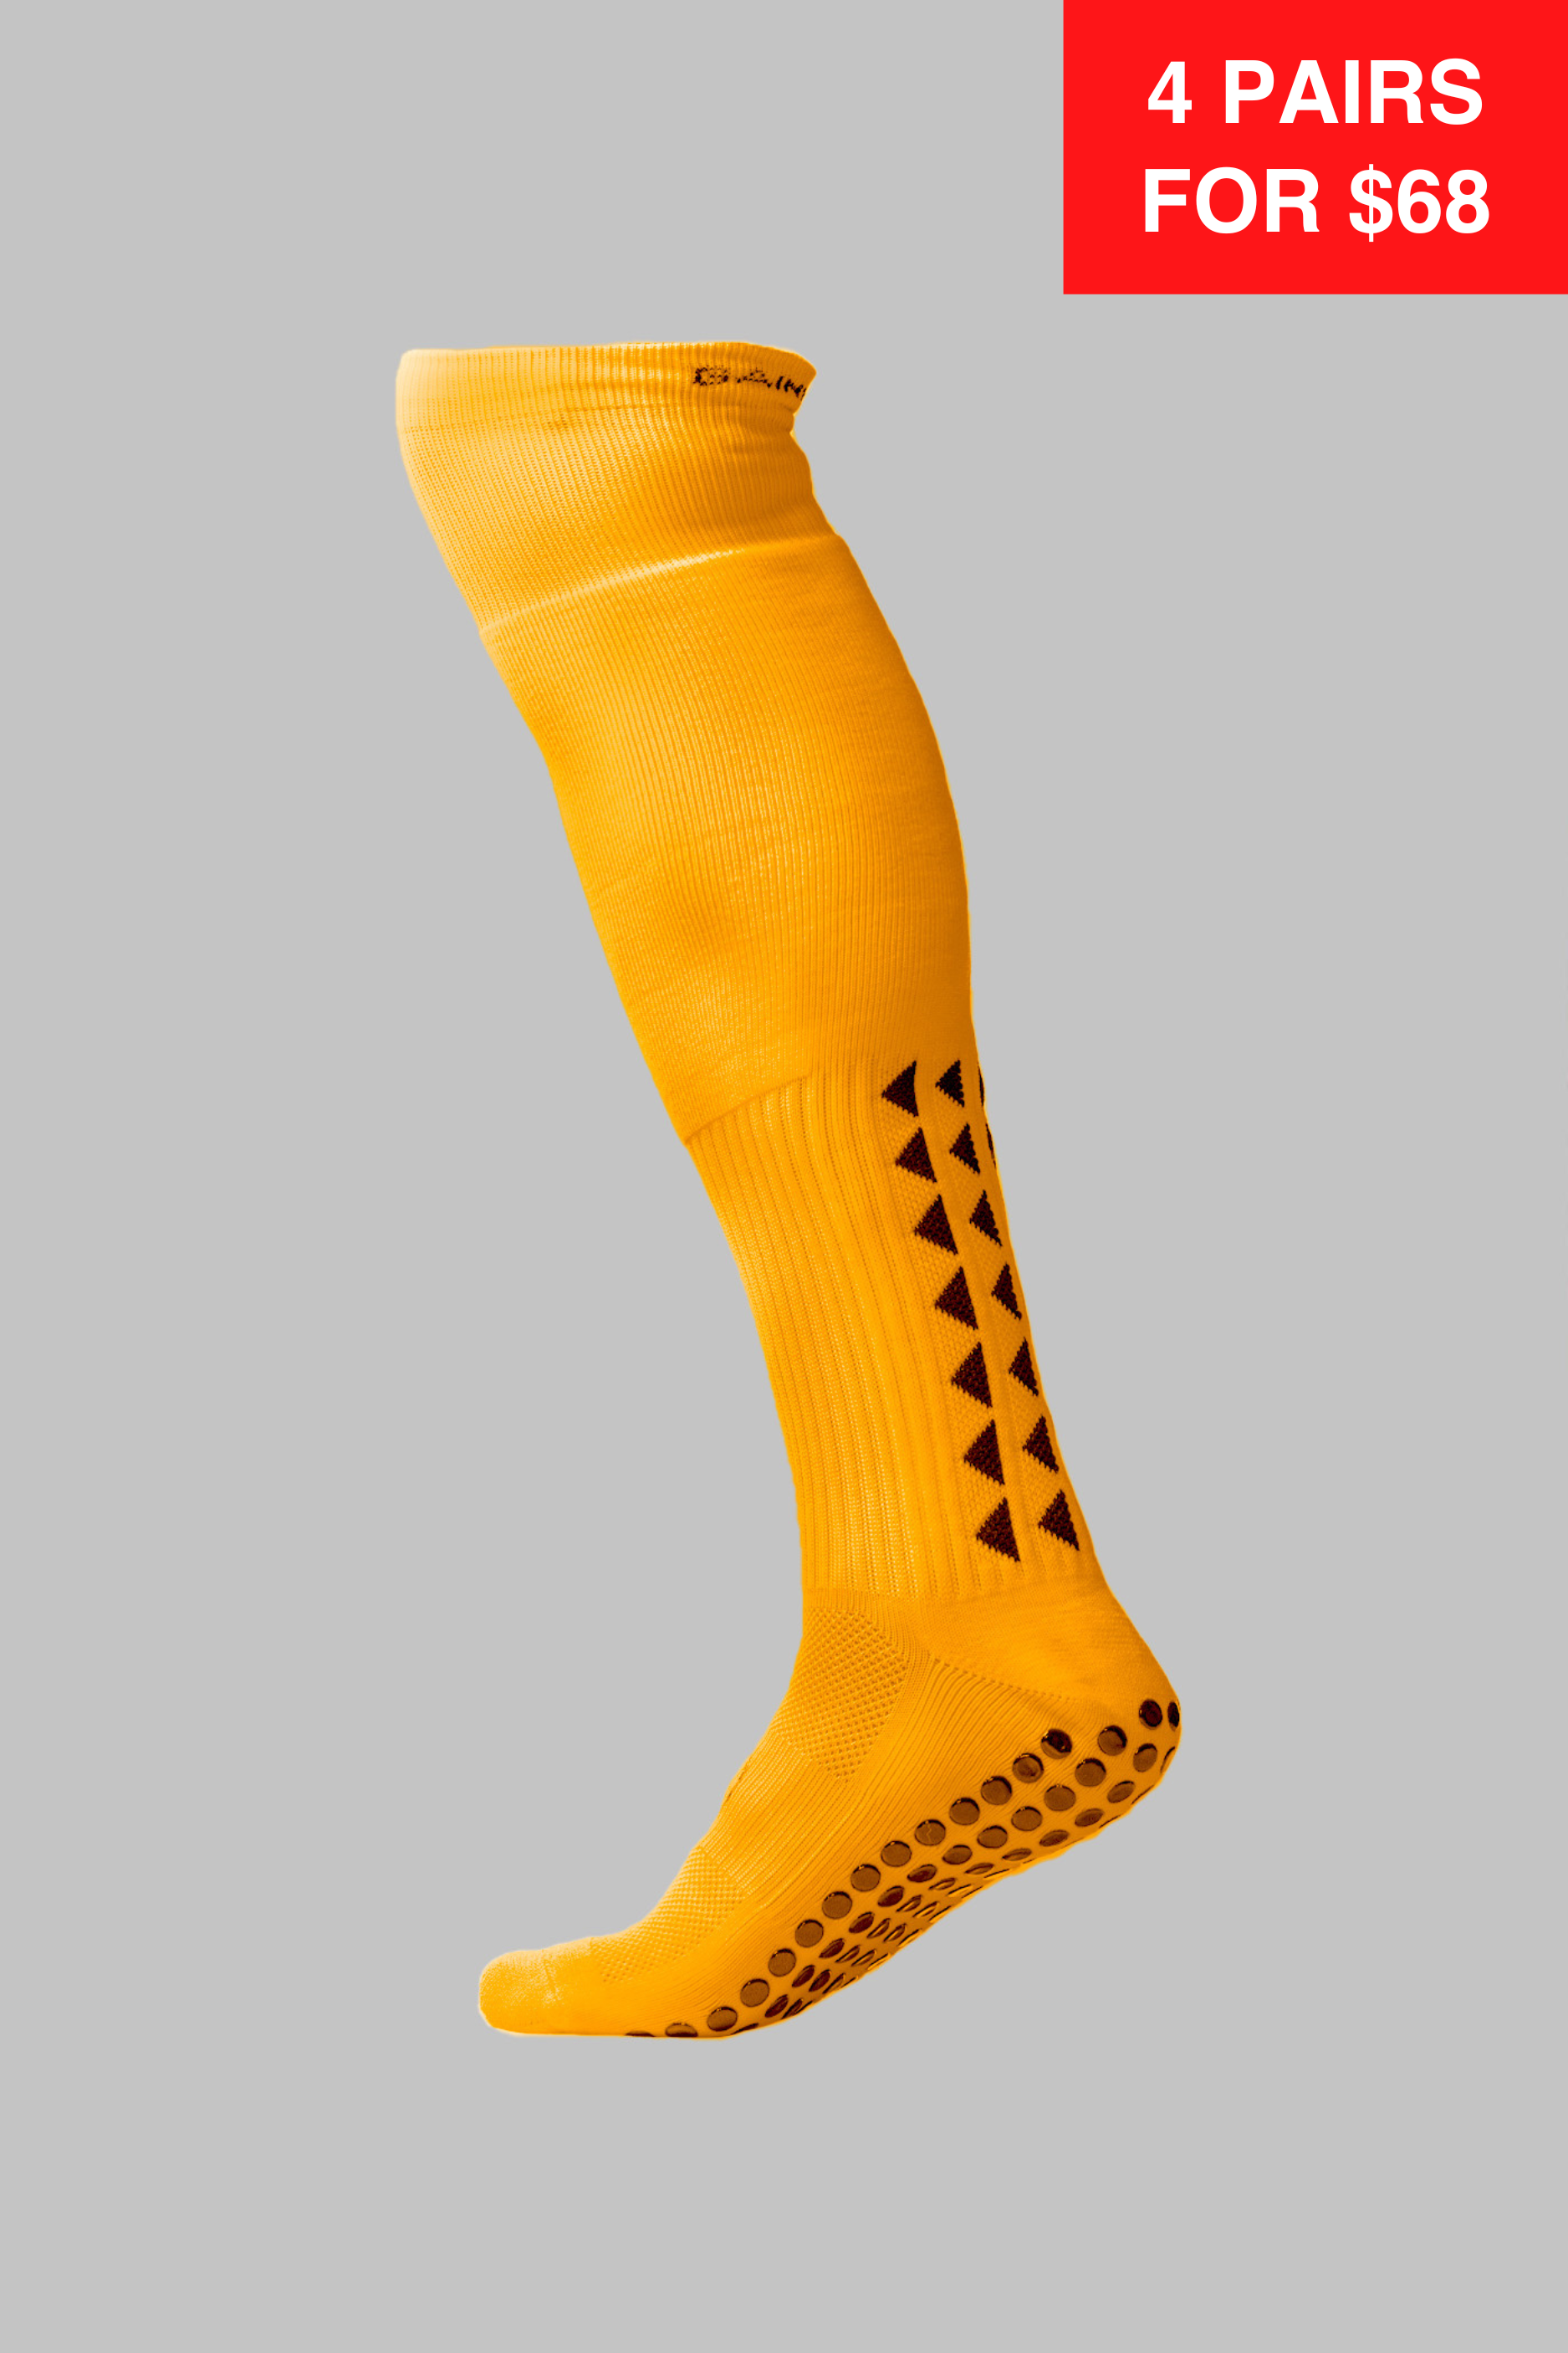 Gain The Edge Grip Socks - Authentic and New Stock, Sports